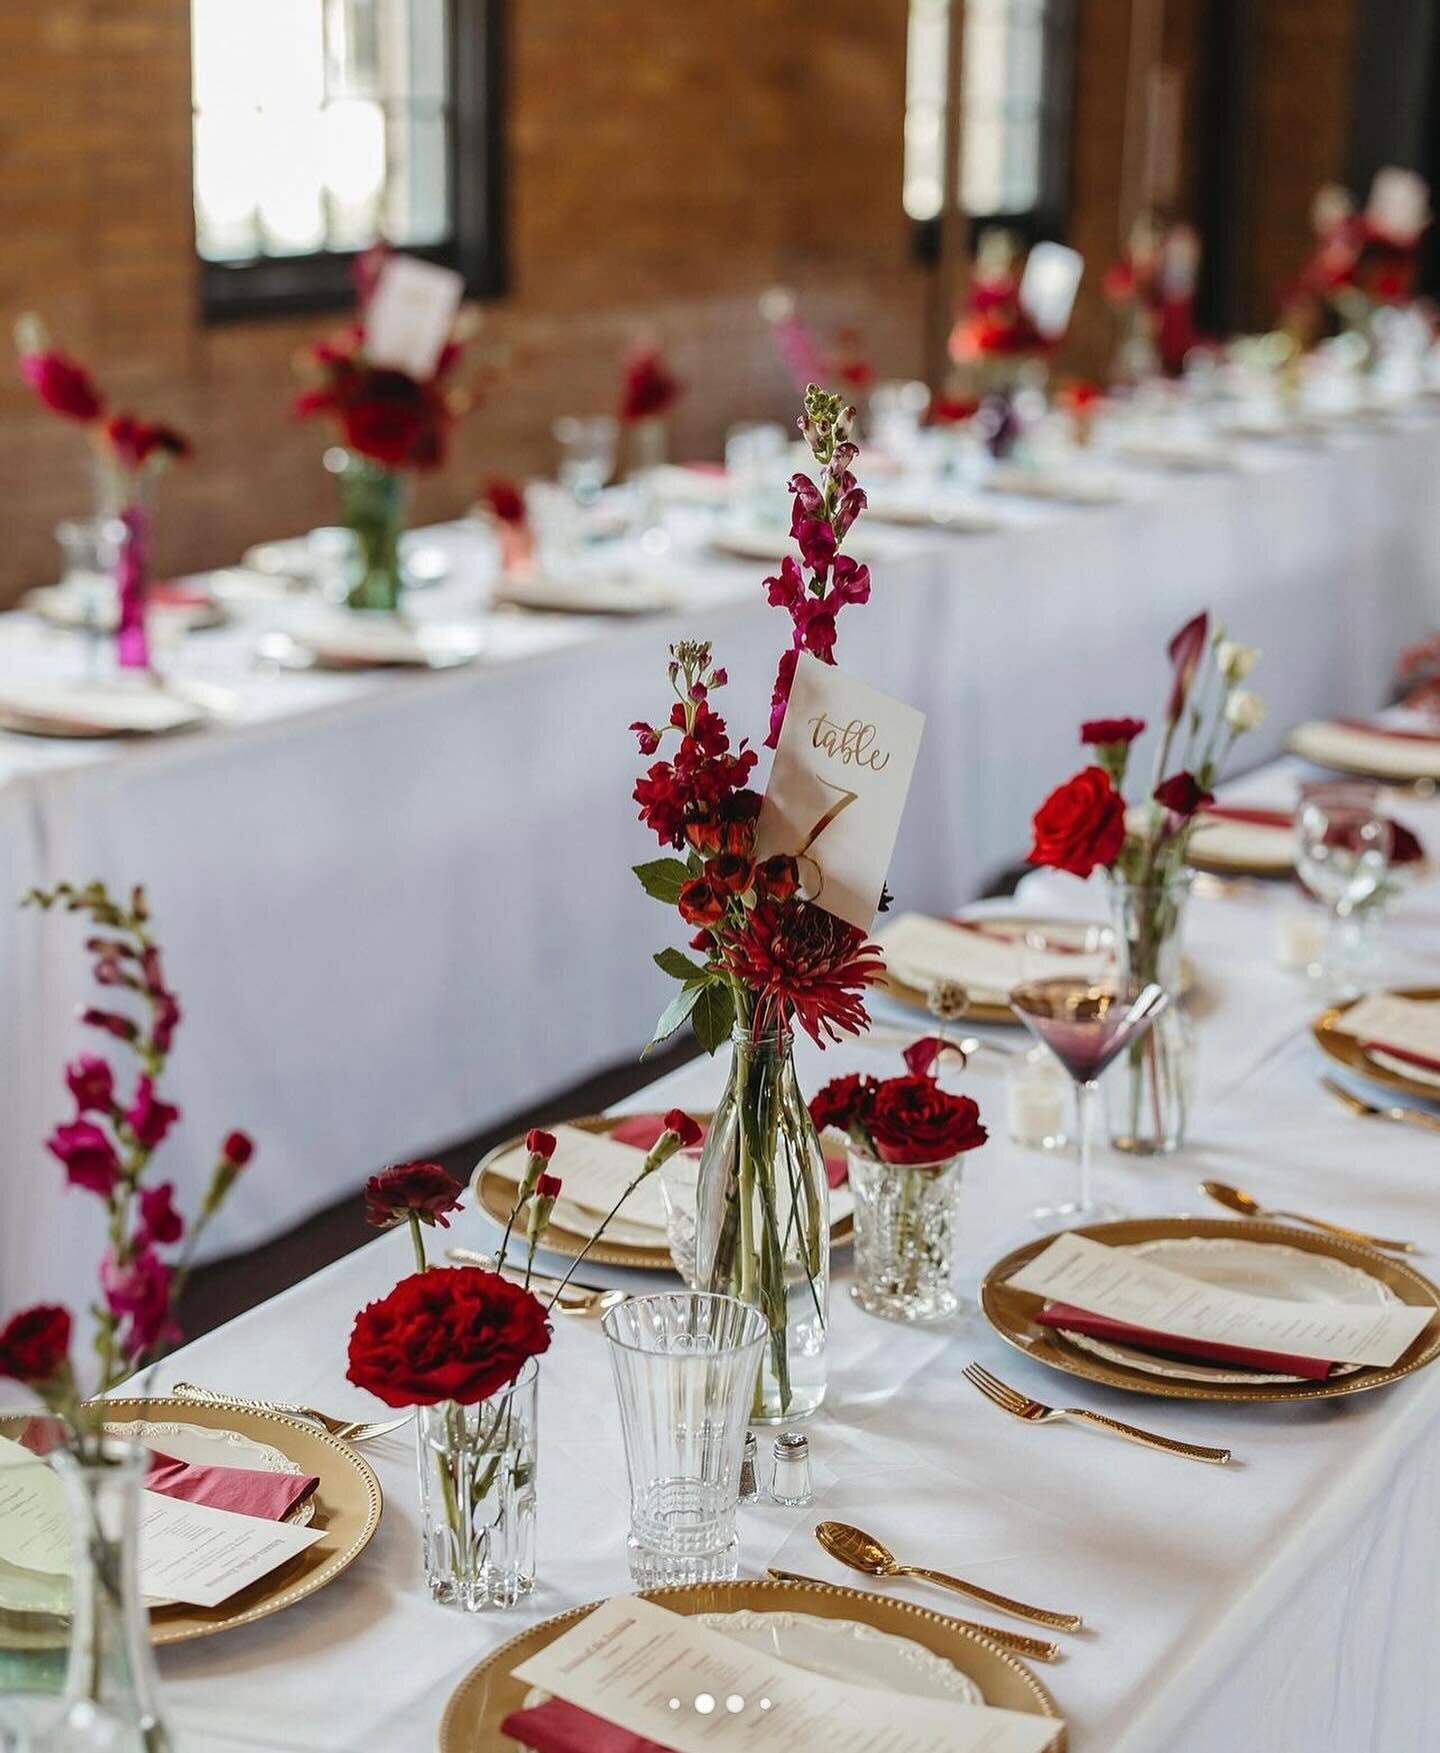 The table is set, we&rsquo;re waiting for you! 

Engaged?! 💍
Planning a holiday party?! 🎄
Celebrating something special?! 🎉

At Fire House KC, we&rsquo;d be proud to host your event!  Schedule your private tour today! 🔥🏡